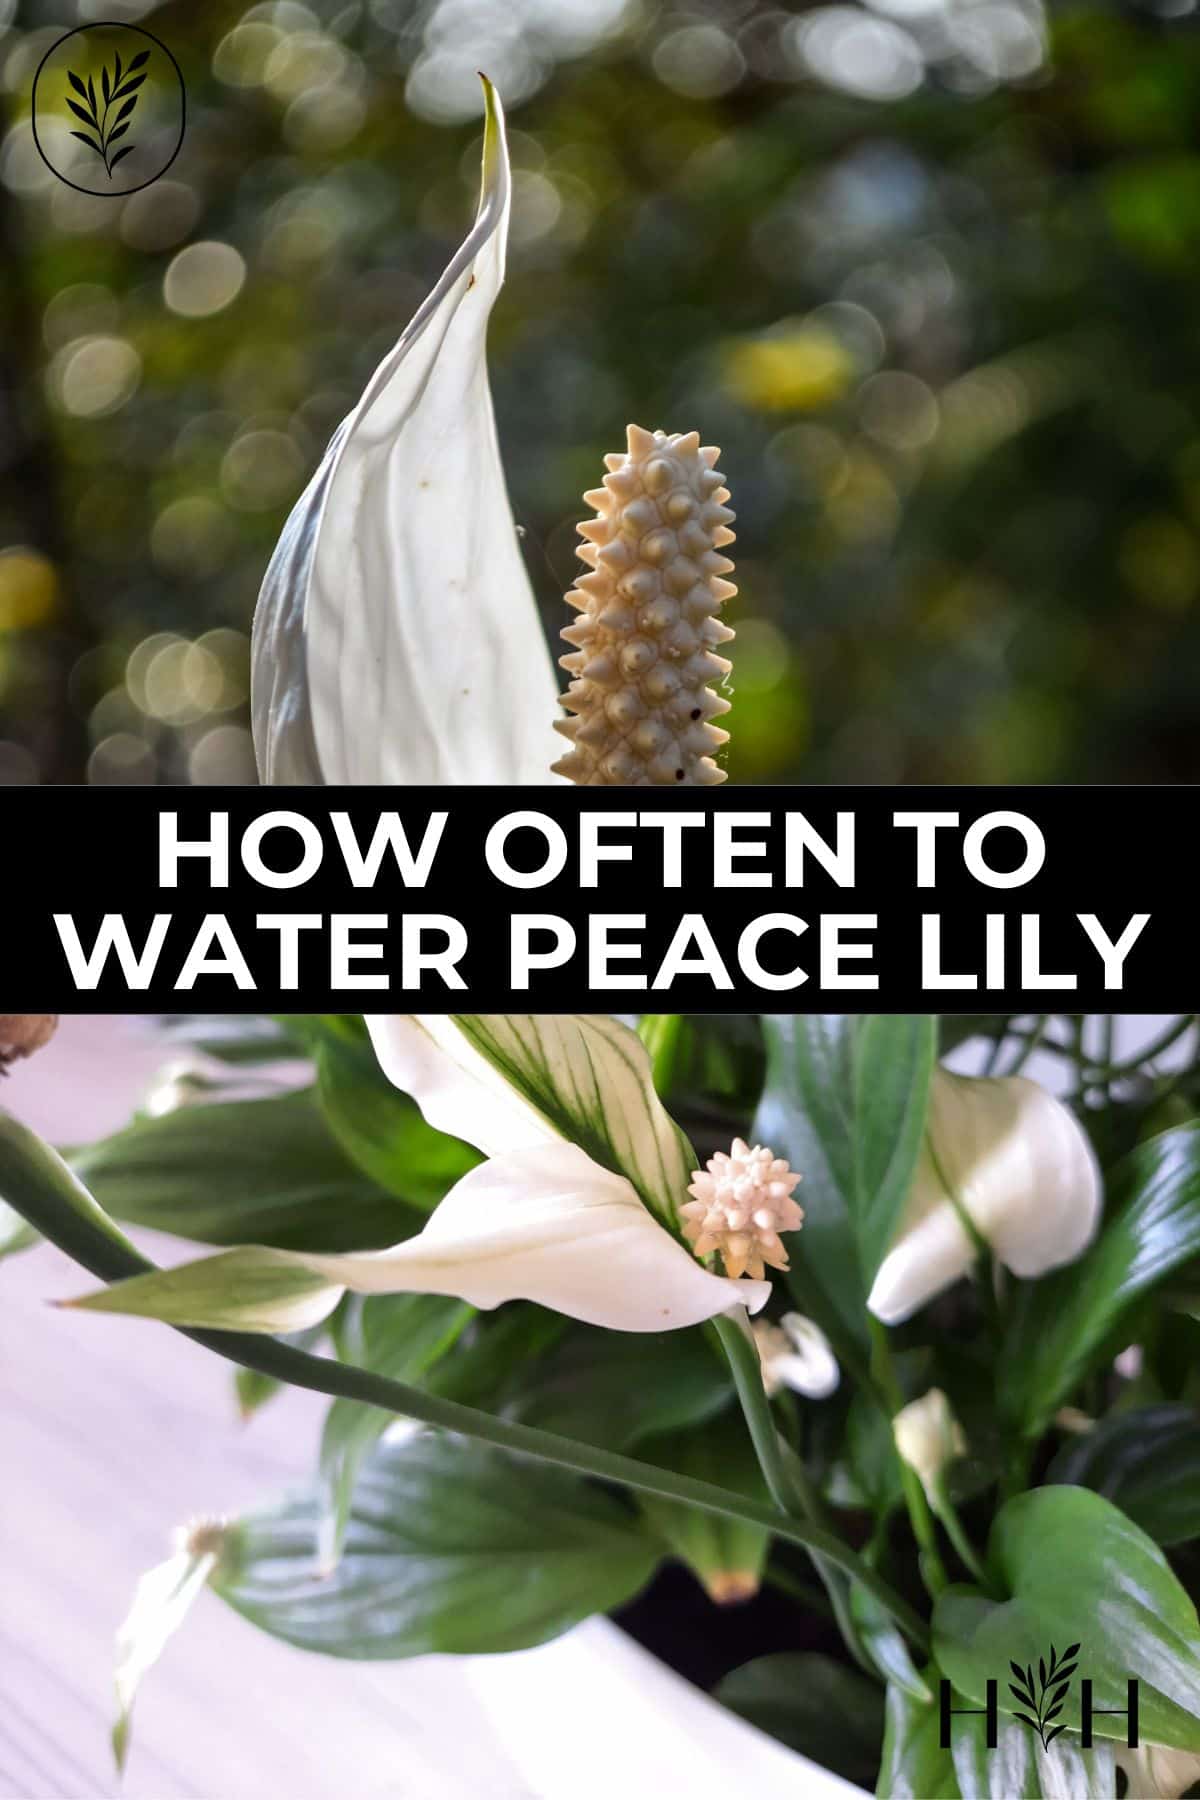 How often to water peace lily via @home4theharvest